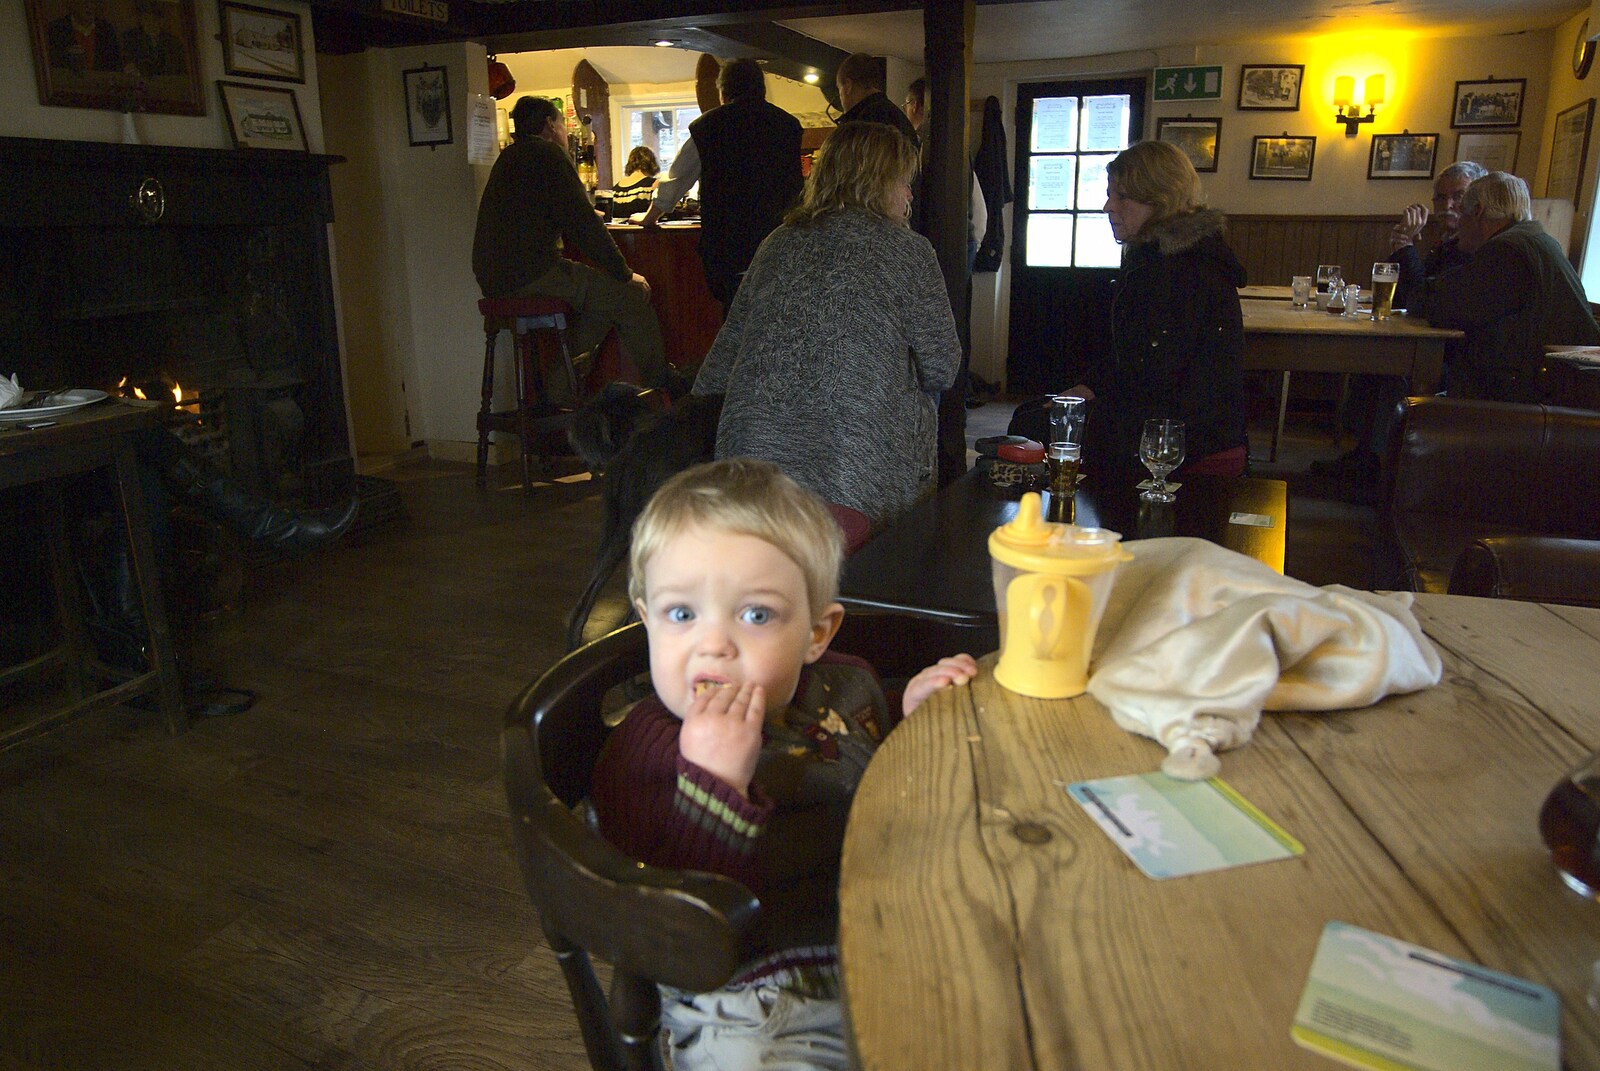 Fred the Head eats crackers and cheese in the Oyster Inn, Butley from The BBs with Ed Sheeran, Fred's Haircut, and East Lane, Diss, Ipswich and Bawdsey  - 21st February 2010